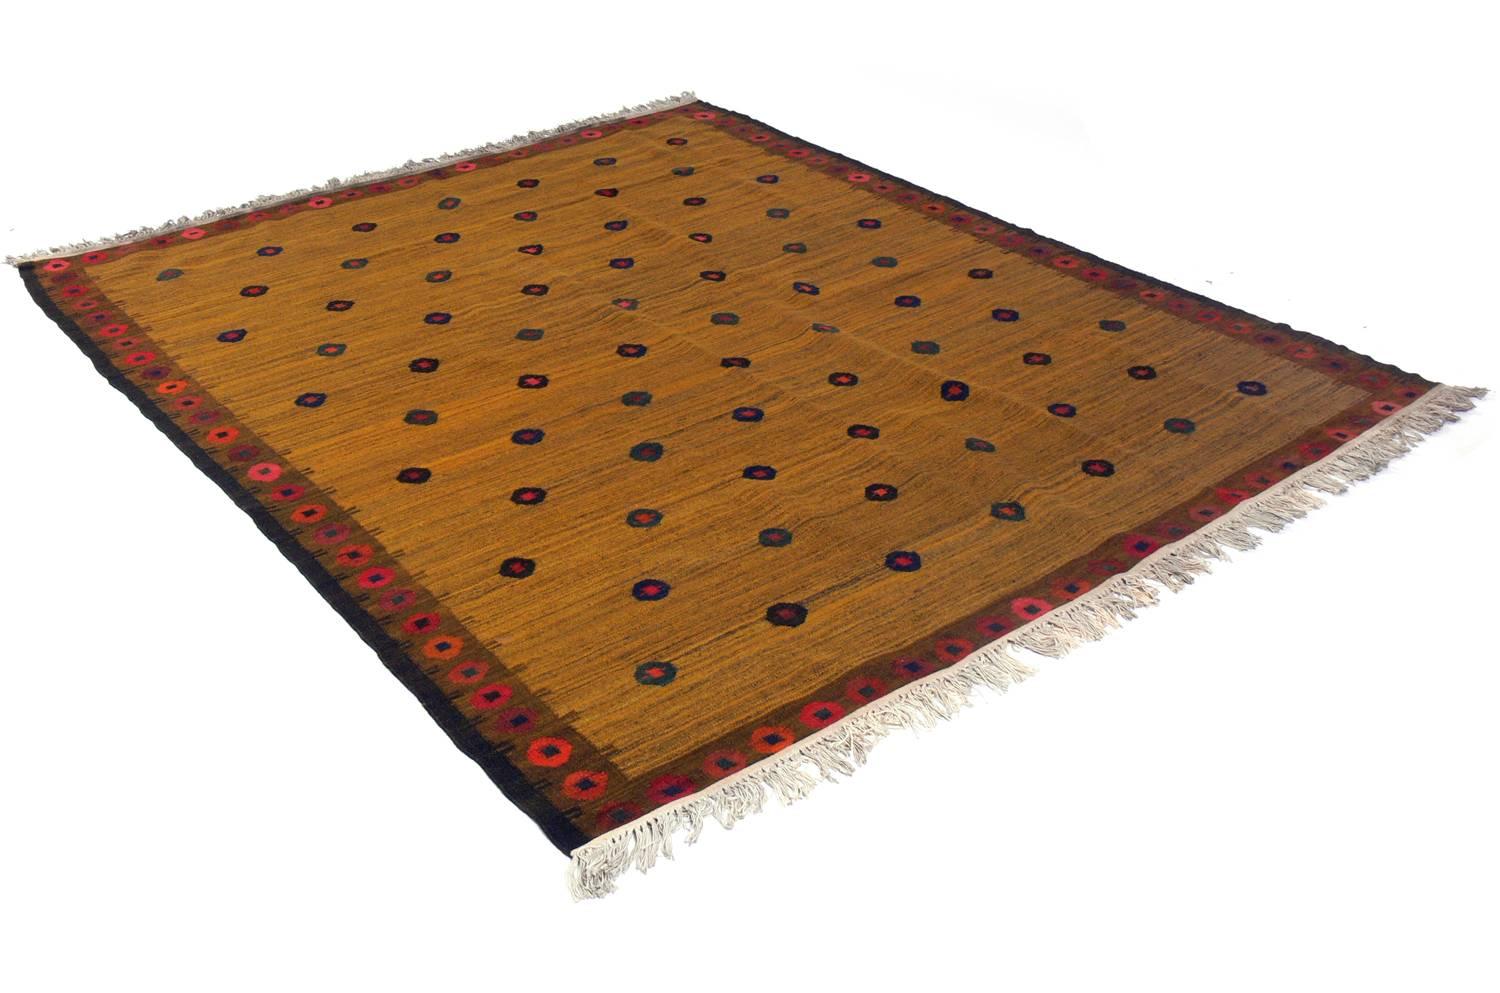 Danish Modern flat-weave Carpet, probably Swedish, circa 1950s. Nice tight weave with a beautiful design in deep reds and oranges on a saffron yellow color field. This rug is an impressive size at '.